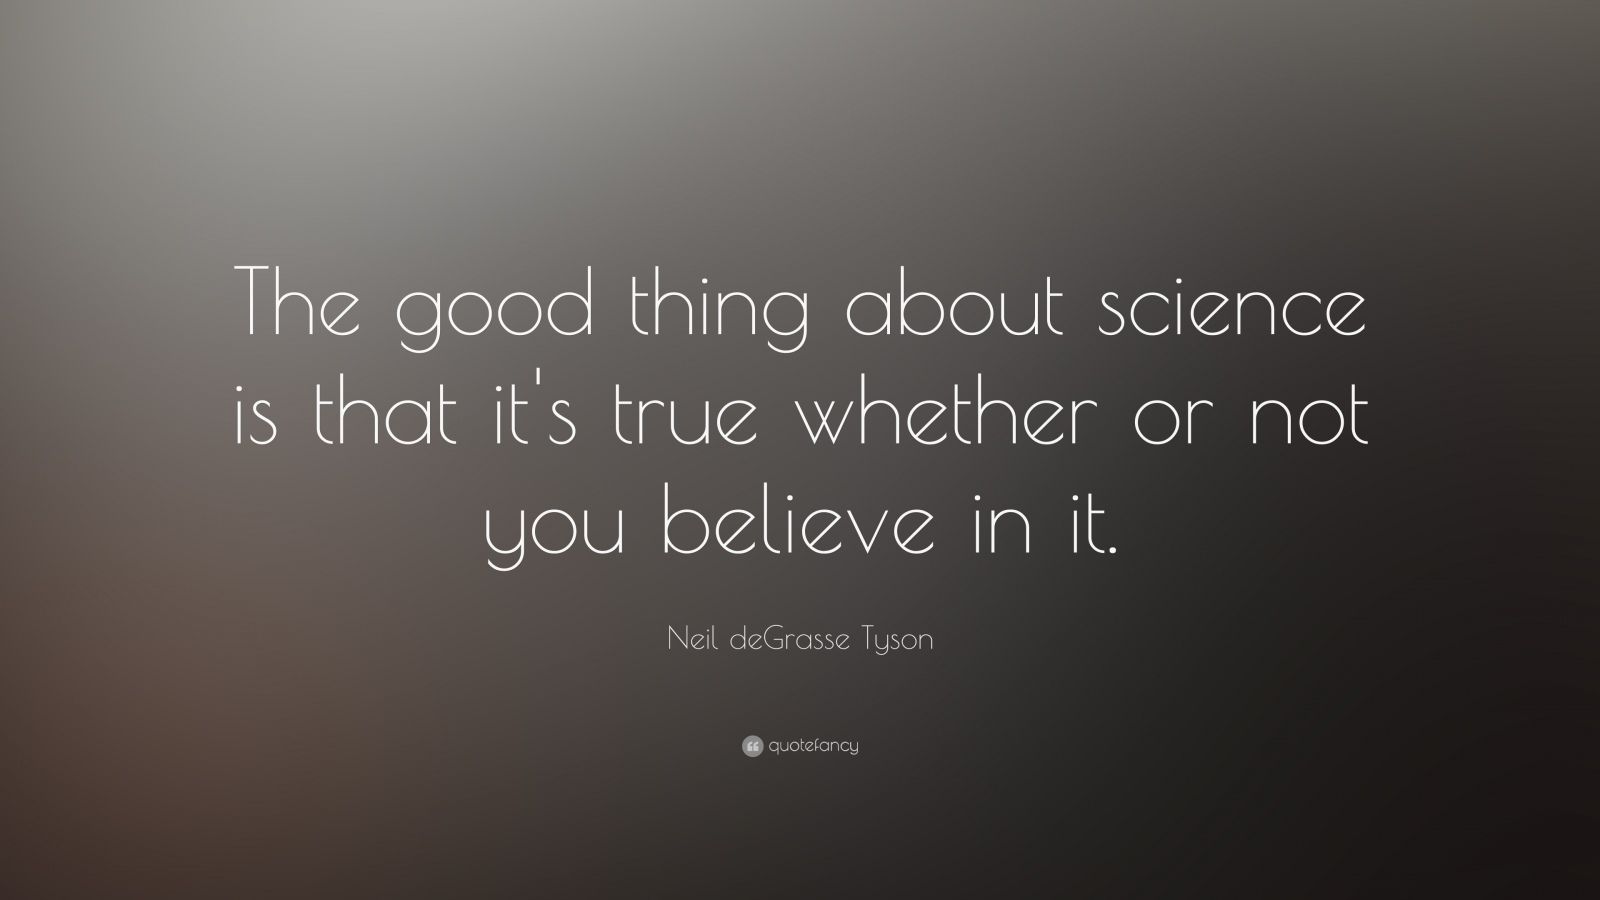 Neil deGrasse Tyson Quote: “The good thing about science is that